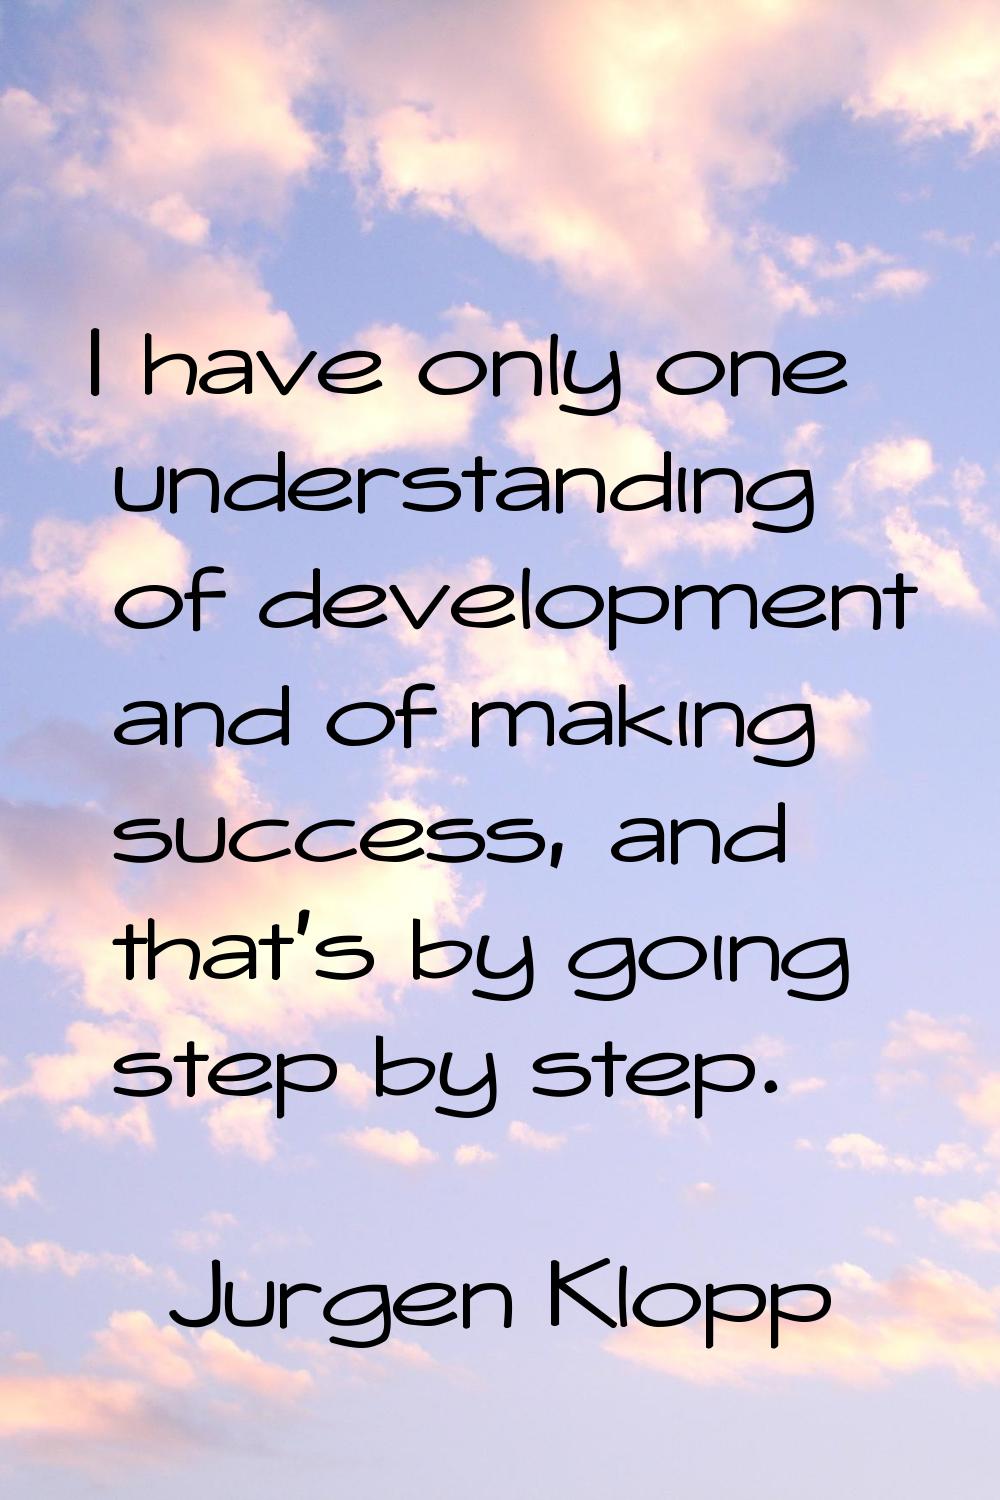 I have only one understanding of development and of making success, and that's by going step by ste